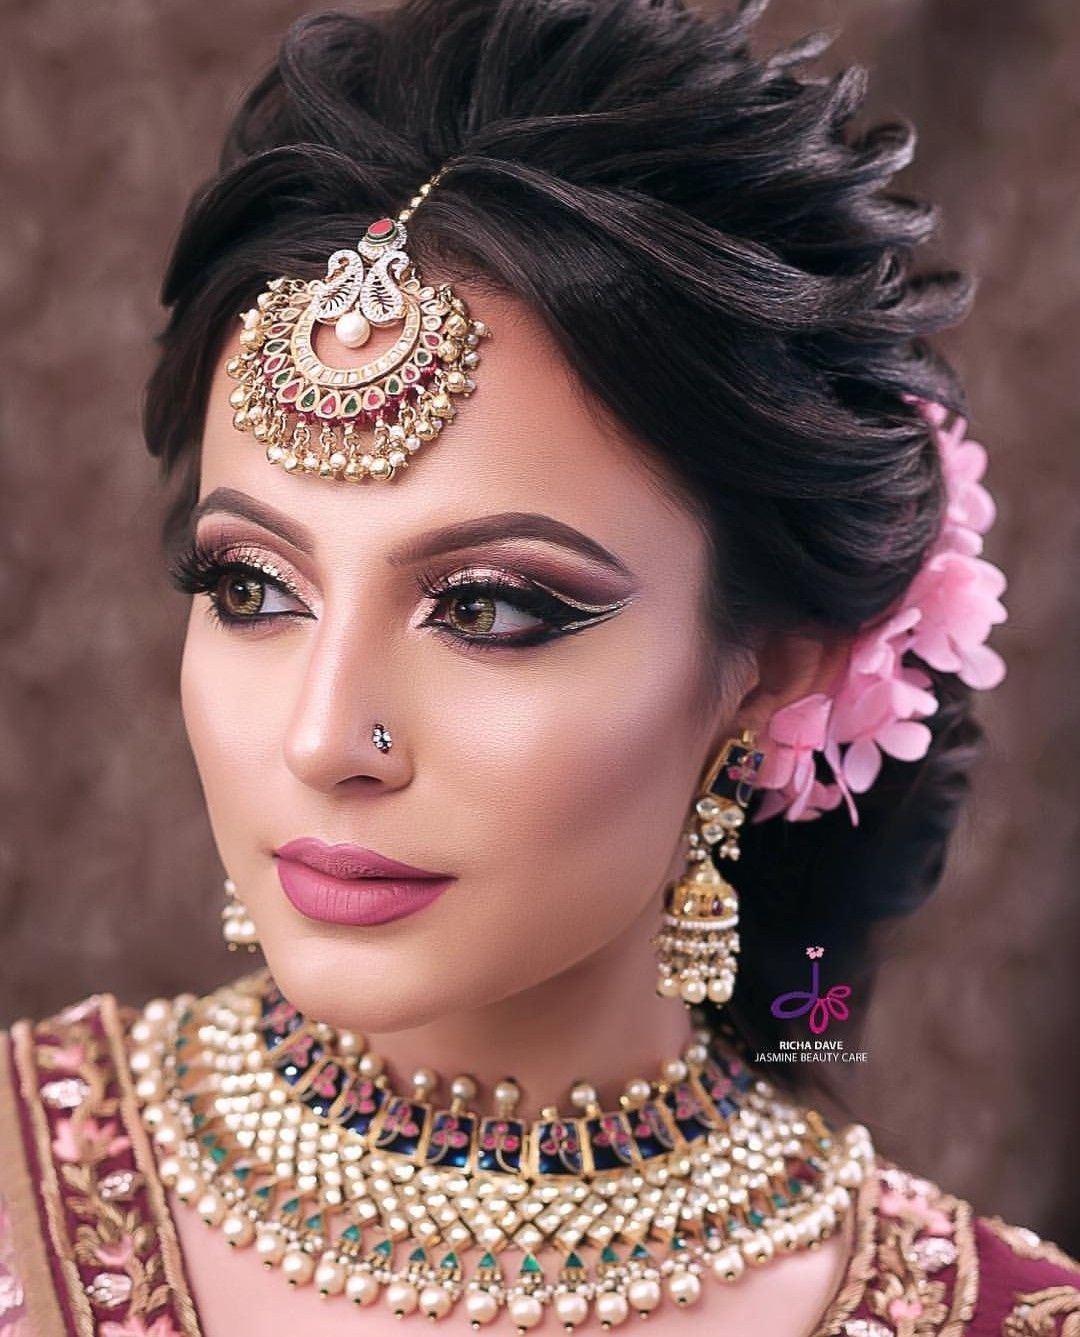 Shikachand | Indian Wedding Hairstyles in Indian Wedding Day Makeup Pictures